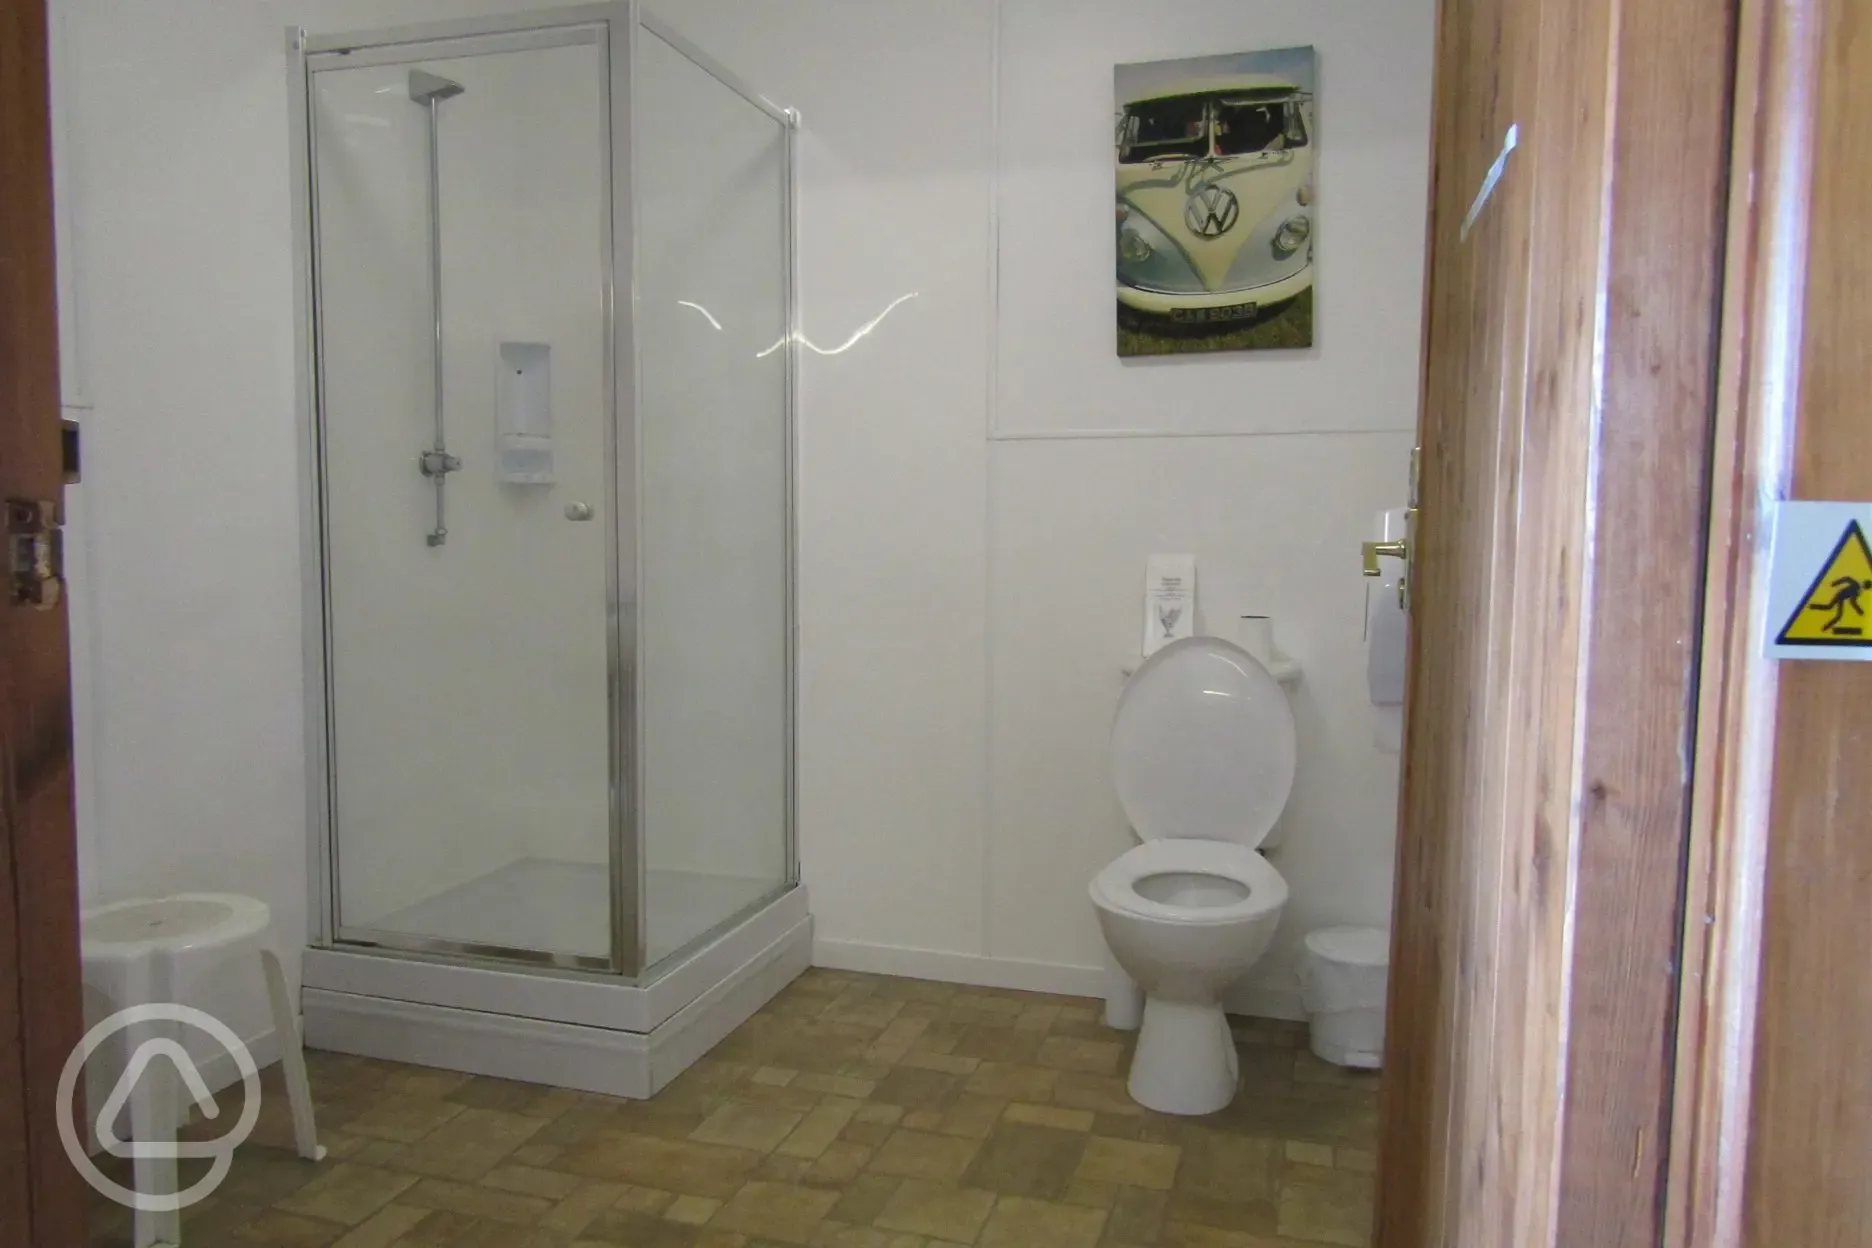 We have 4 large shower rooms and additional WC's